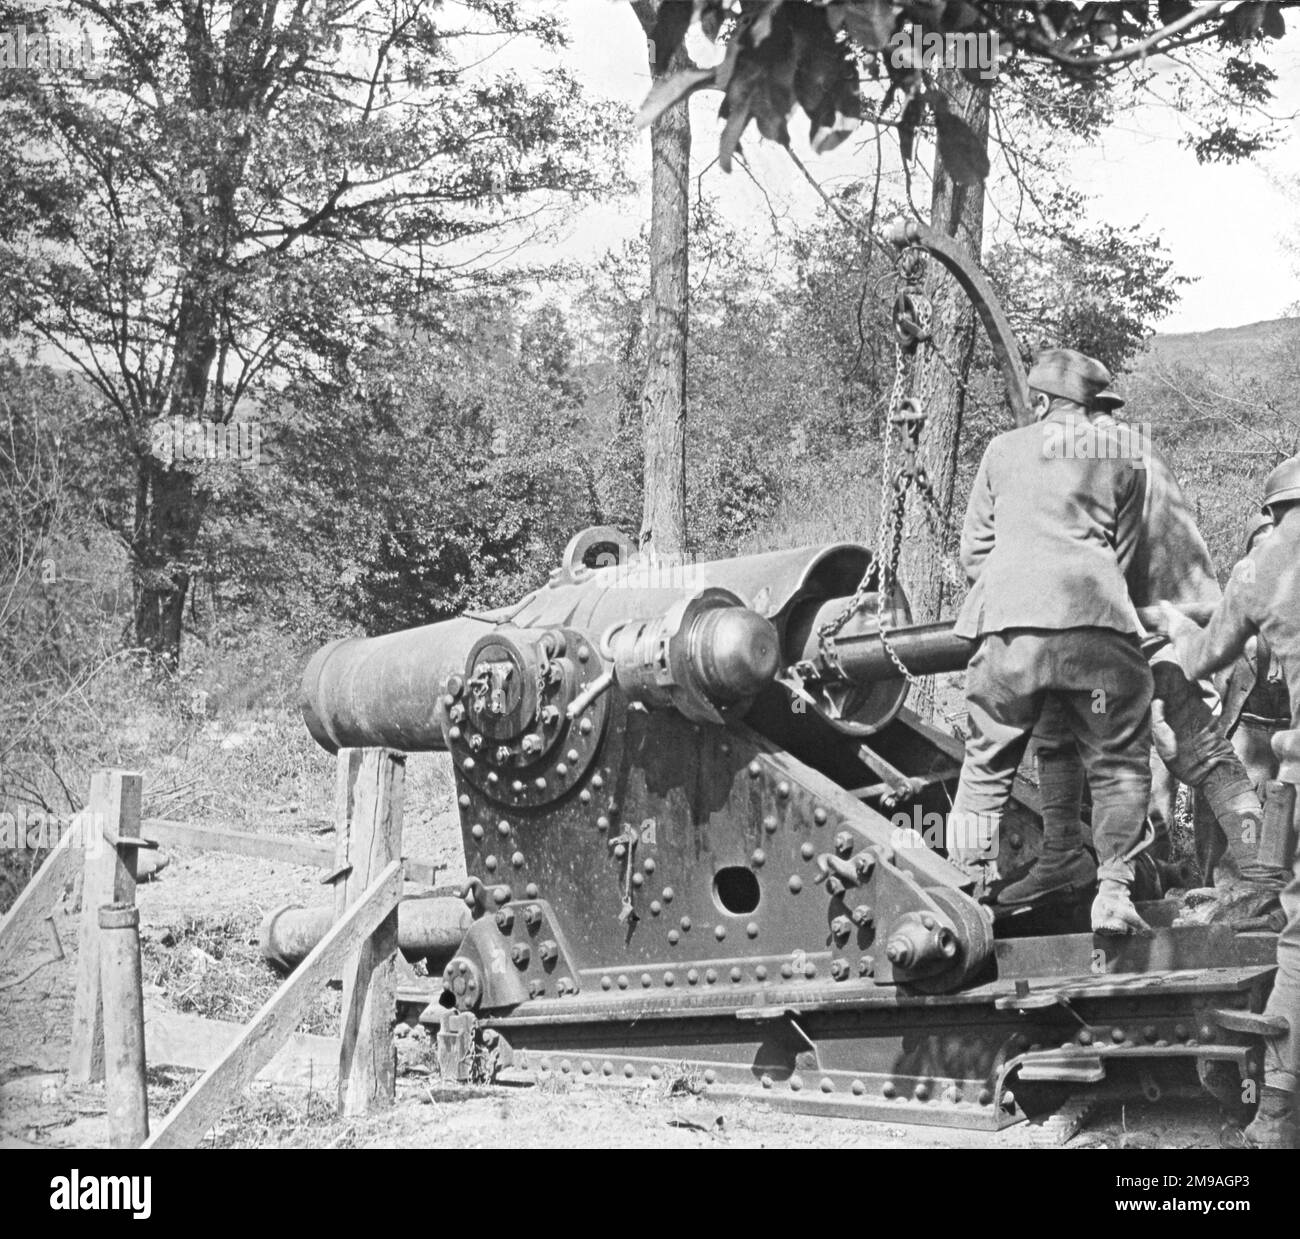 A Mortier de 270 mm modele 1885 being loaded at the Bois de Givry south of Auxerre. (The RH image of a stereo pair arranged for a crossed eye viewer, where the left eye sees the image on the right and vice cersa) Stock Photo